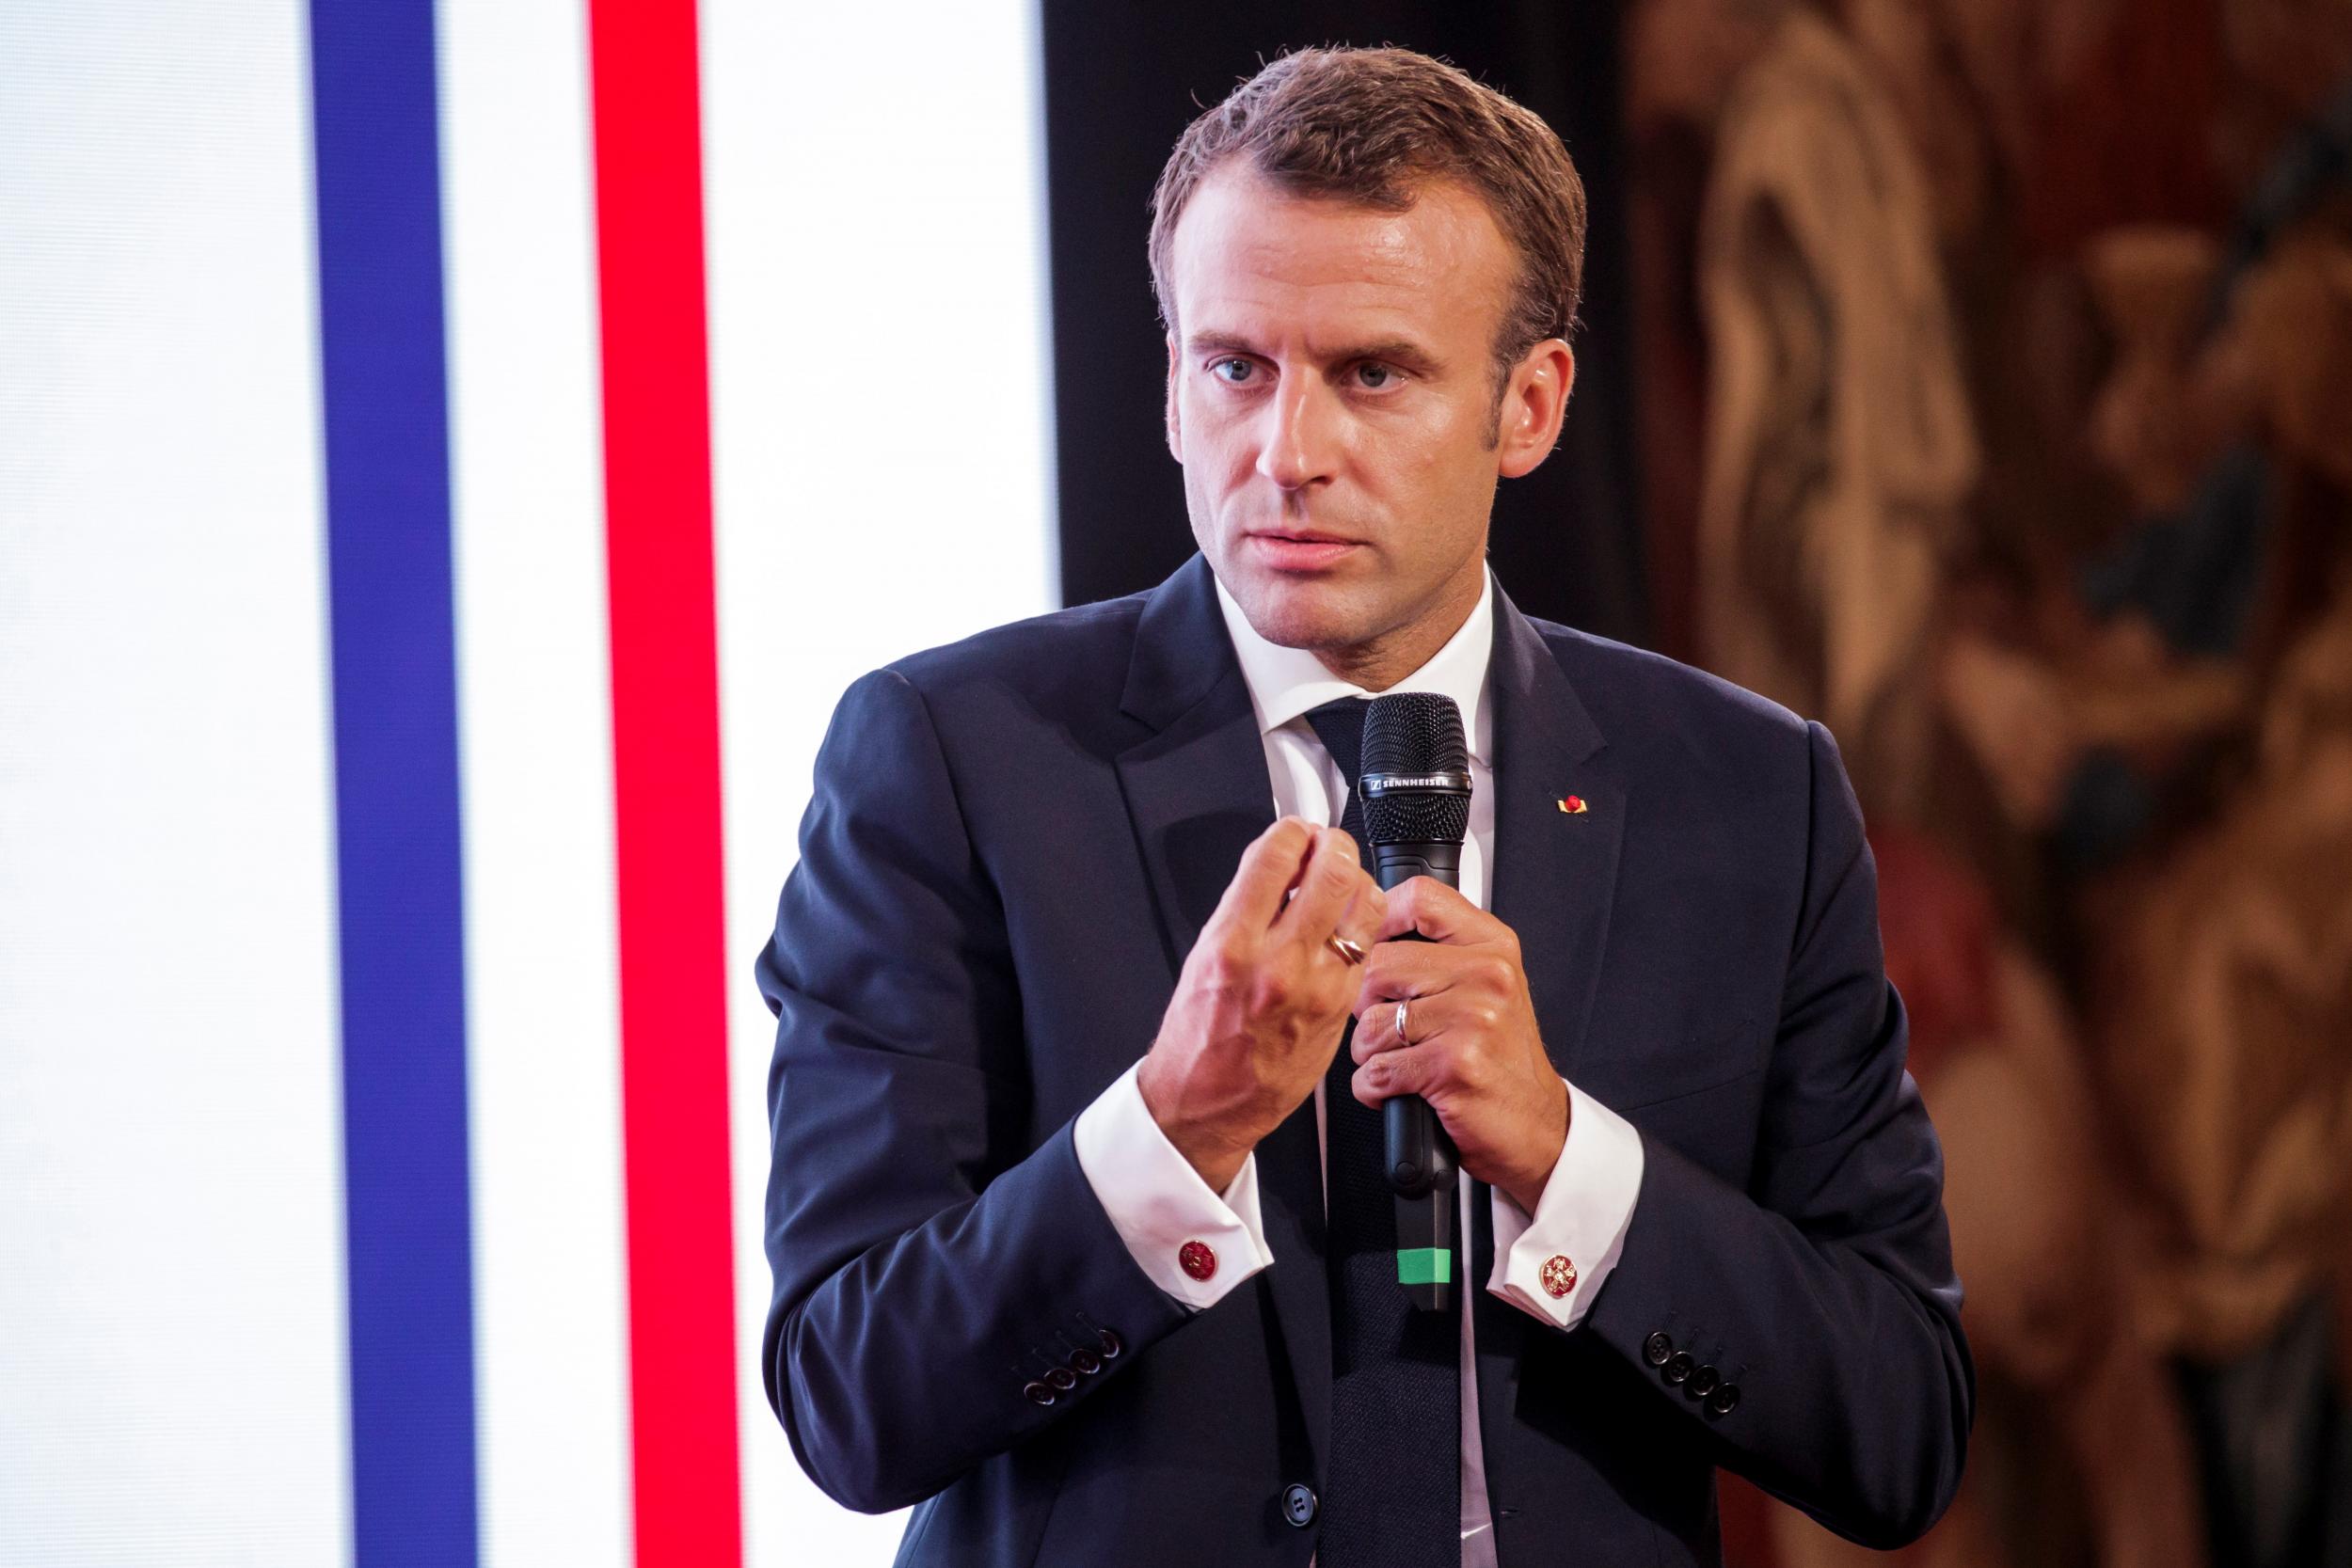 Emmanuel Macron, speaking at a conference today, warned that those who wages trade wars would see job losses